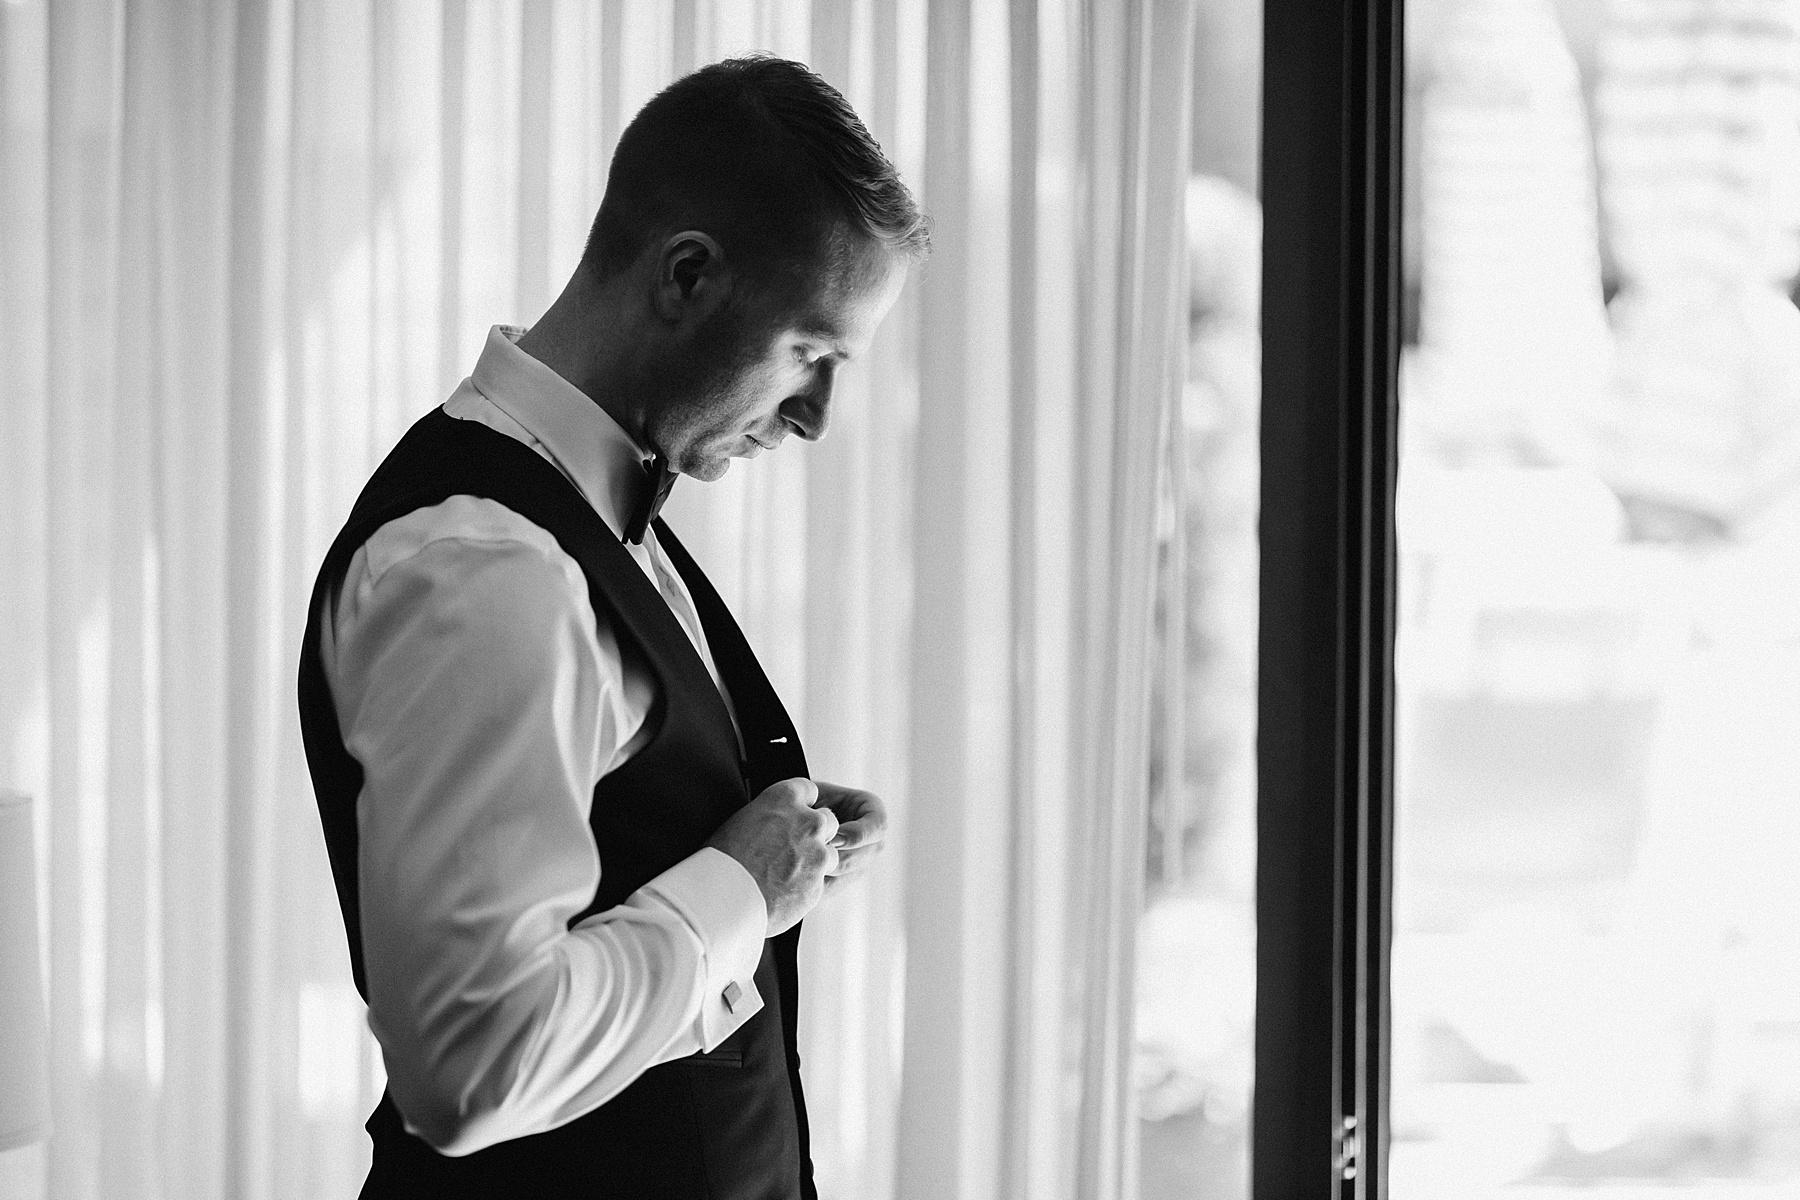 Black and white image of the Groom preparing for his wedding day